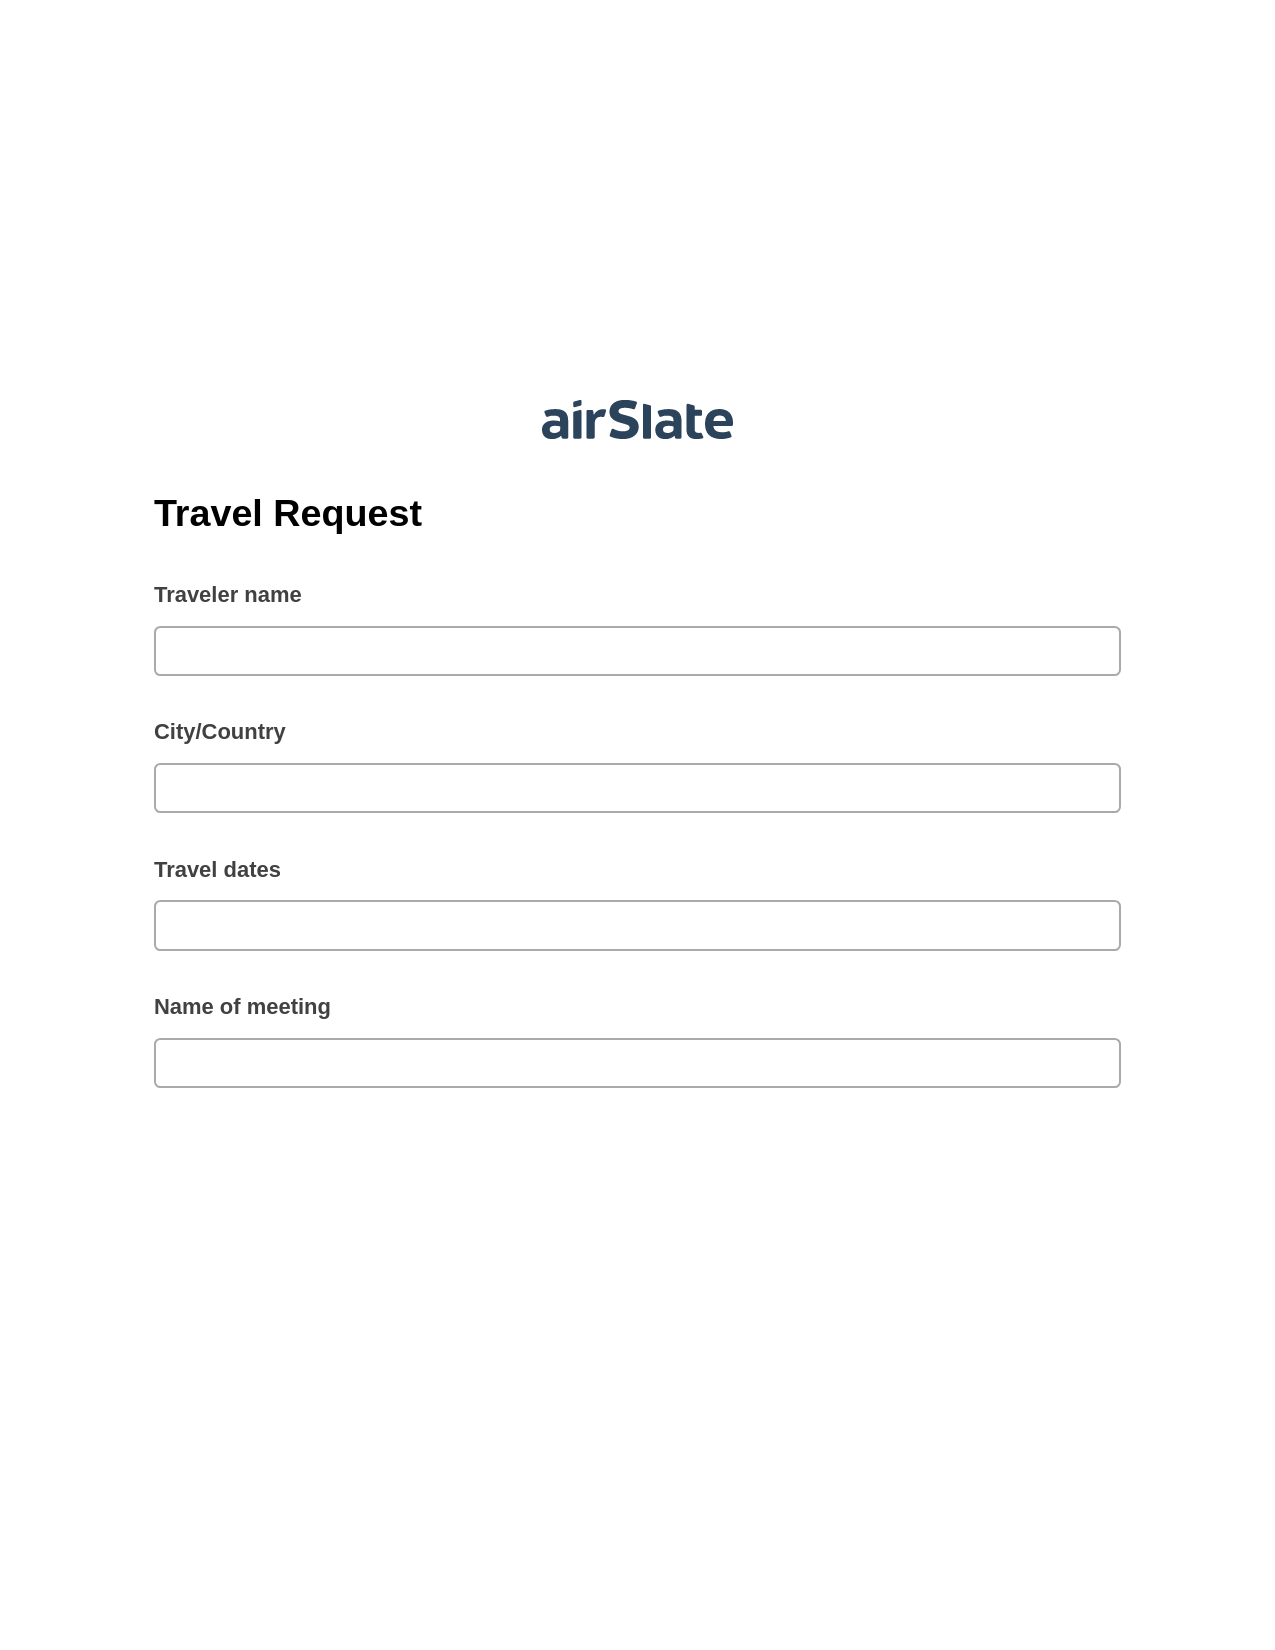 Travel Request Pre-fill from CSV File Bot, Create slate addon, OneDrive Bot